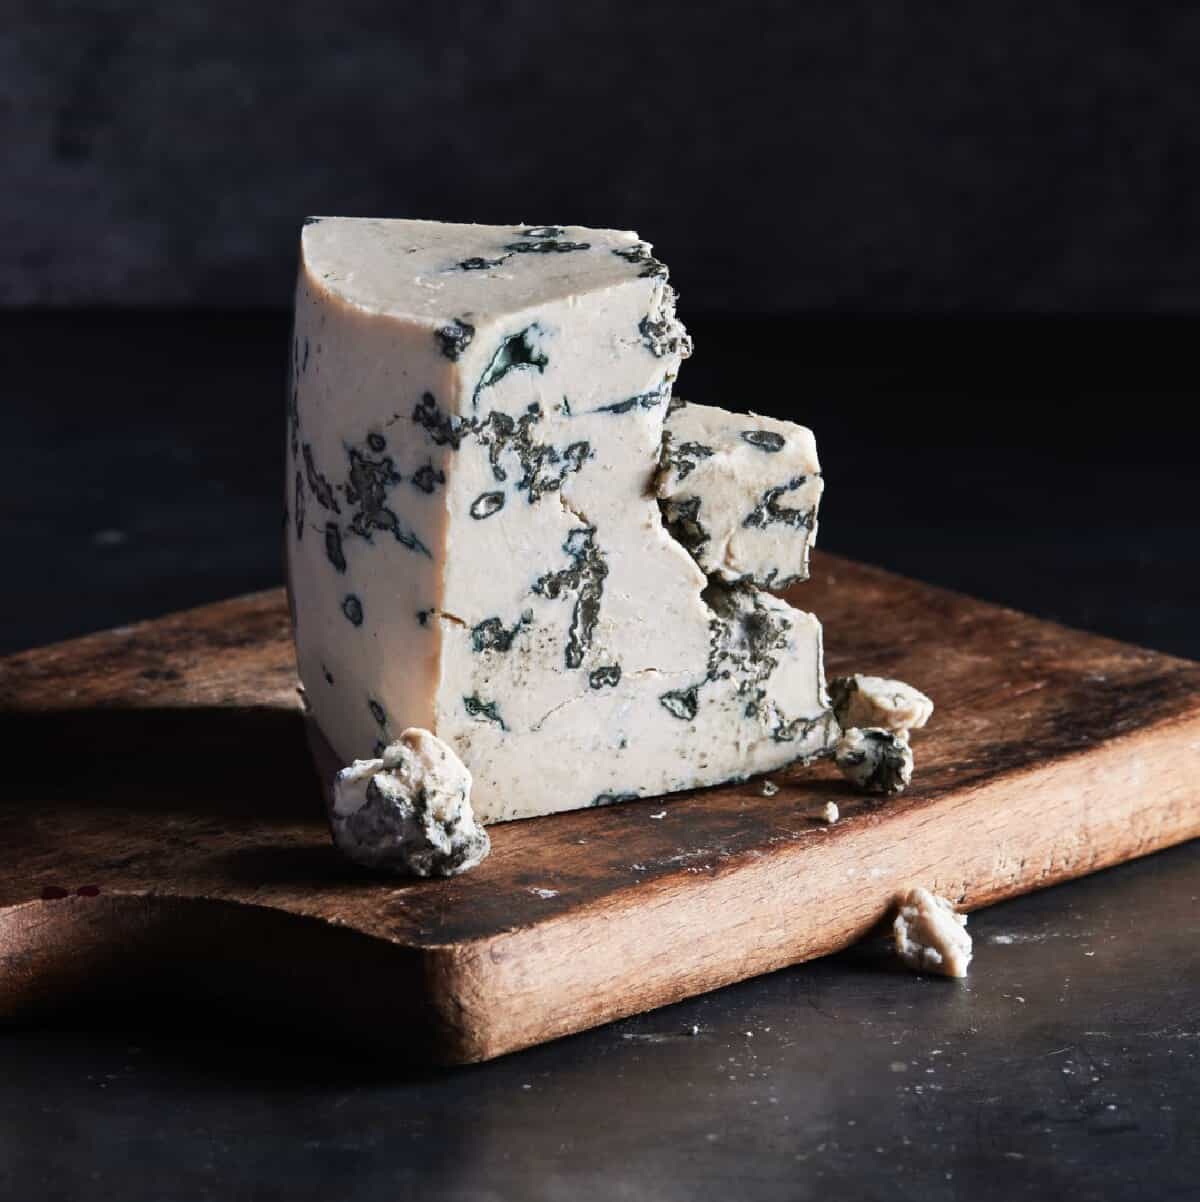 A wedge of Climax's dairy-free, vegan blue cheese on a wooden board.